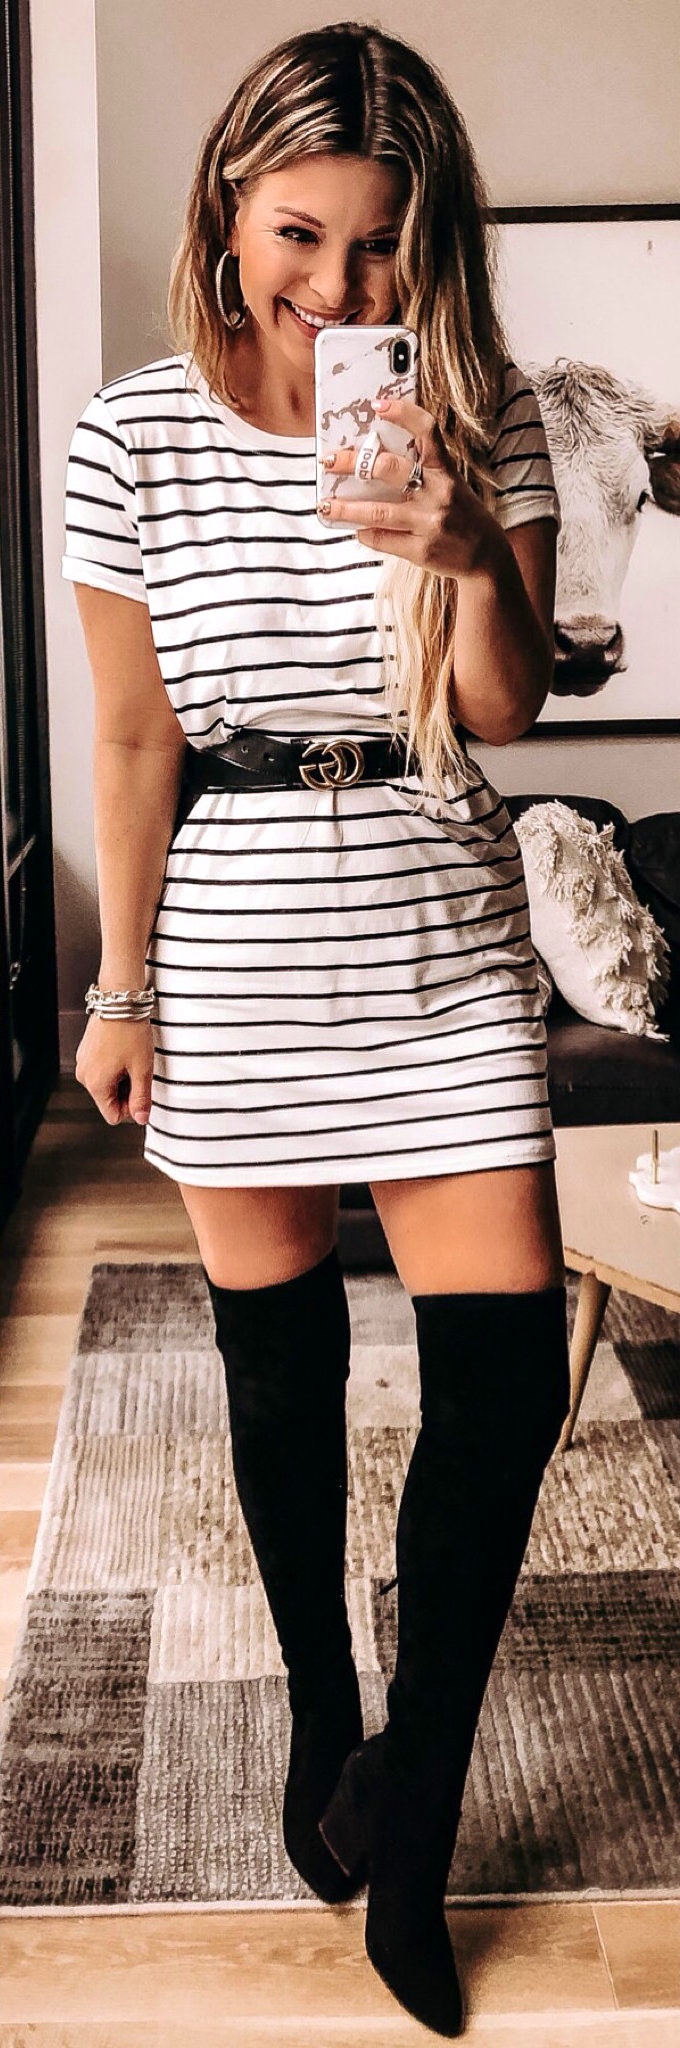 Knee length black boots with white and black striped short-sleeved dress.